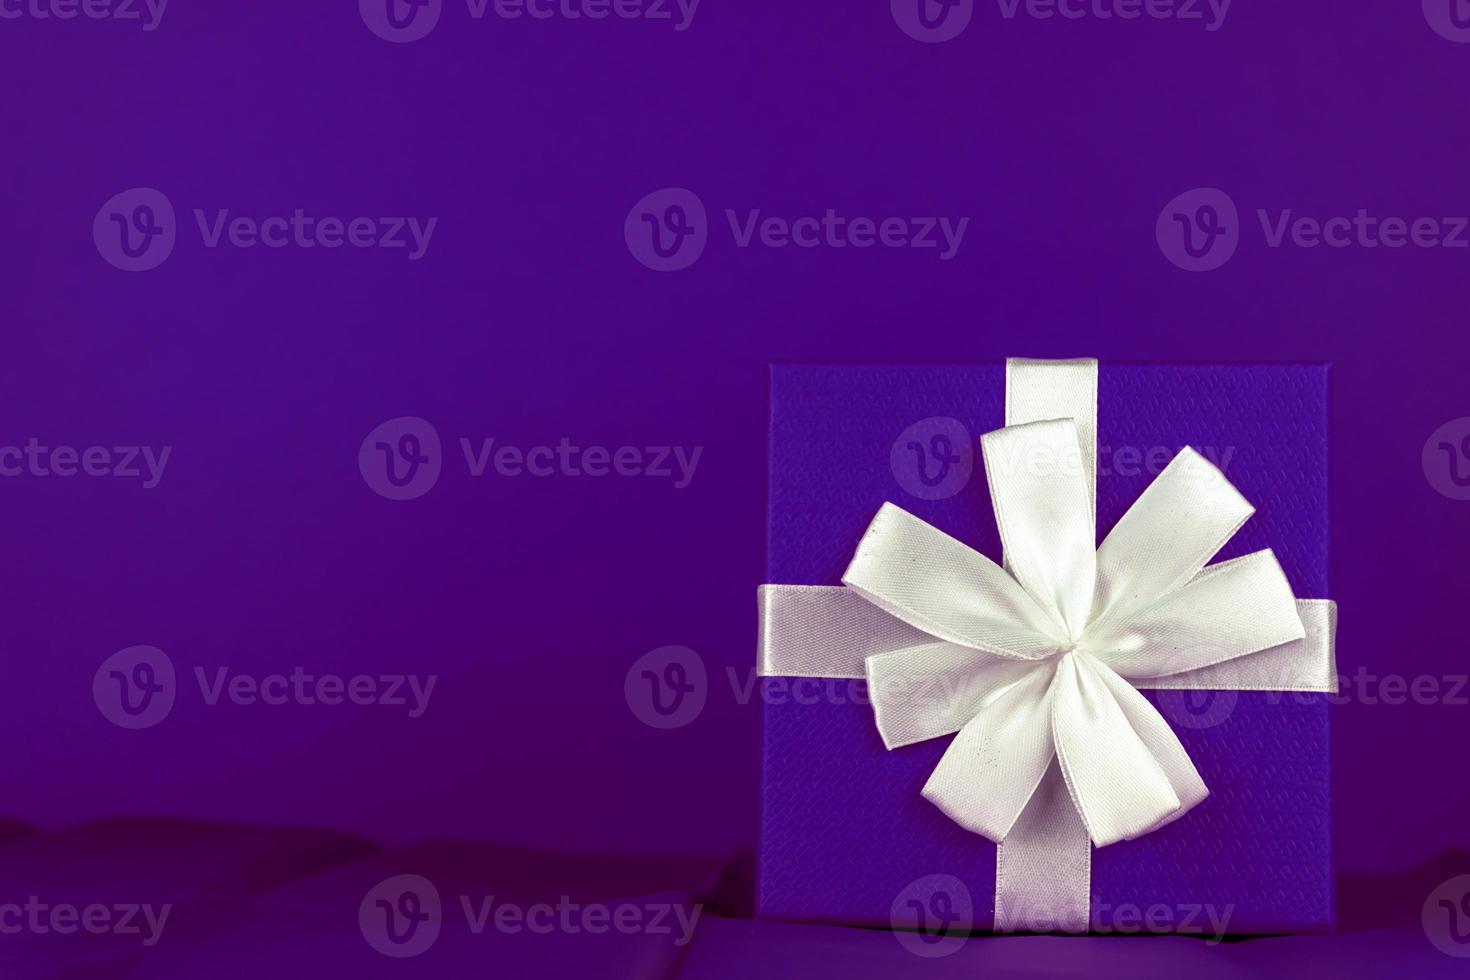 bonochrome violet celebration creeting card, gidt box with tied white bow on purple bckground with copy space. photo